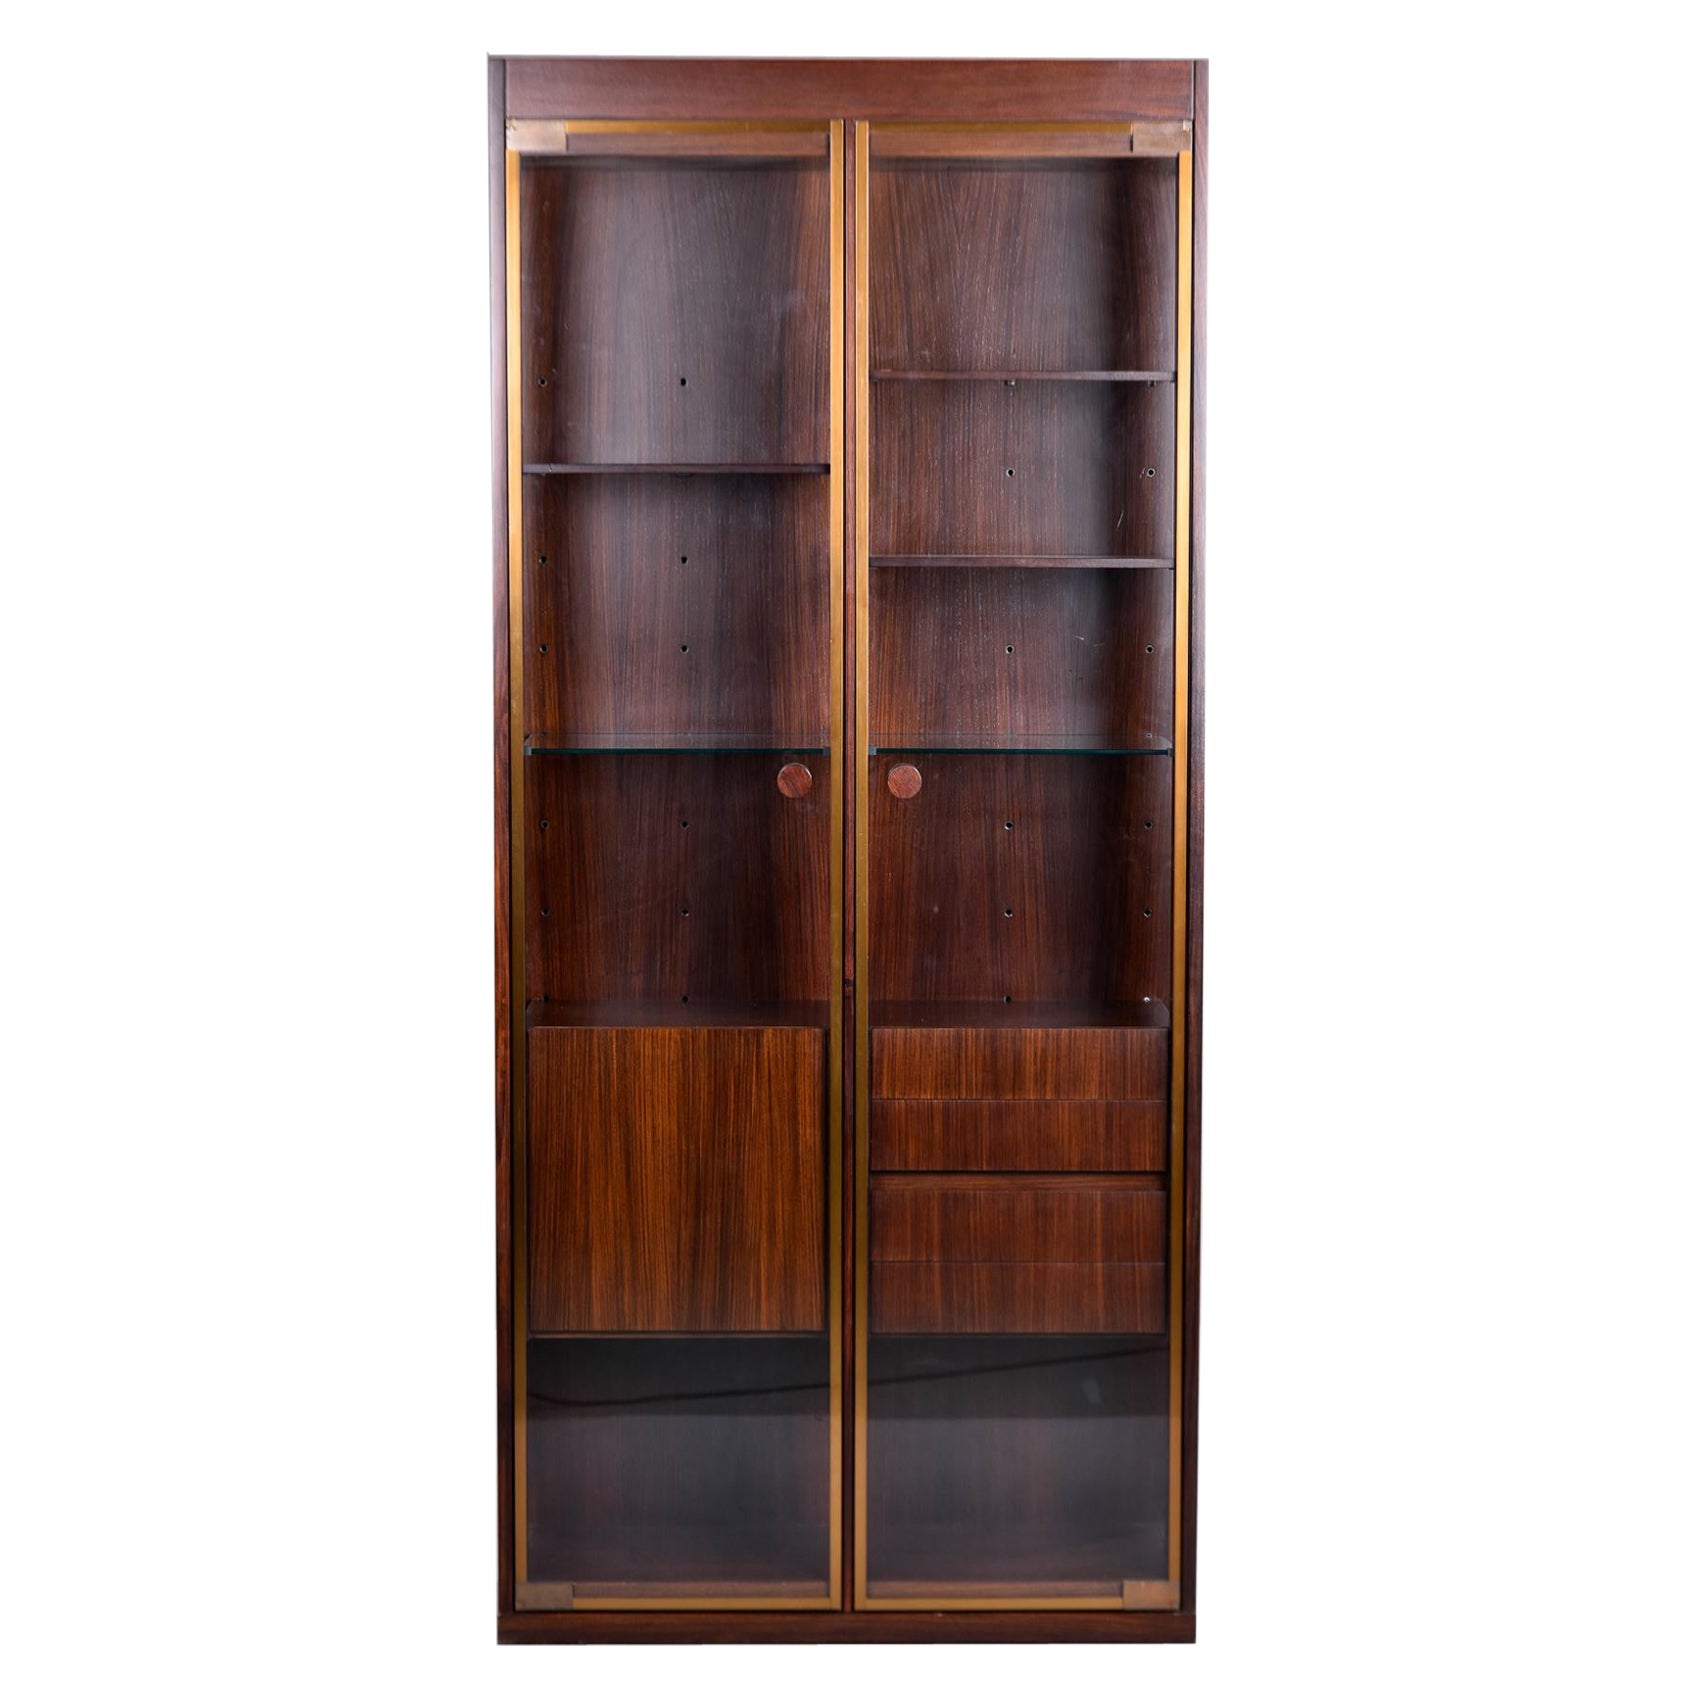 What is a cabinet with glass doors called?